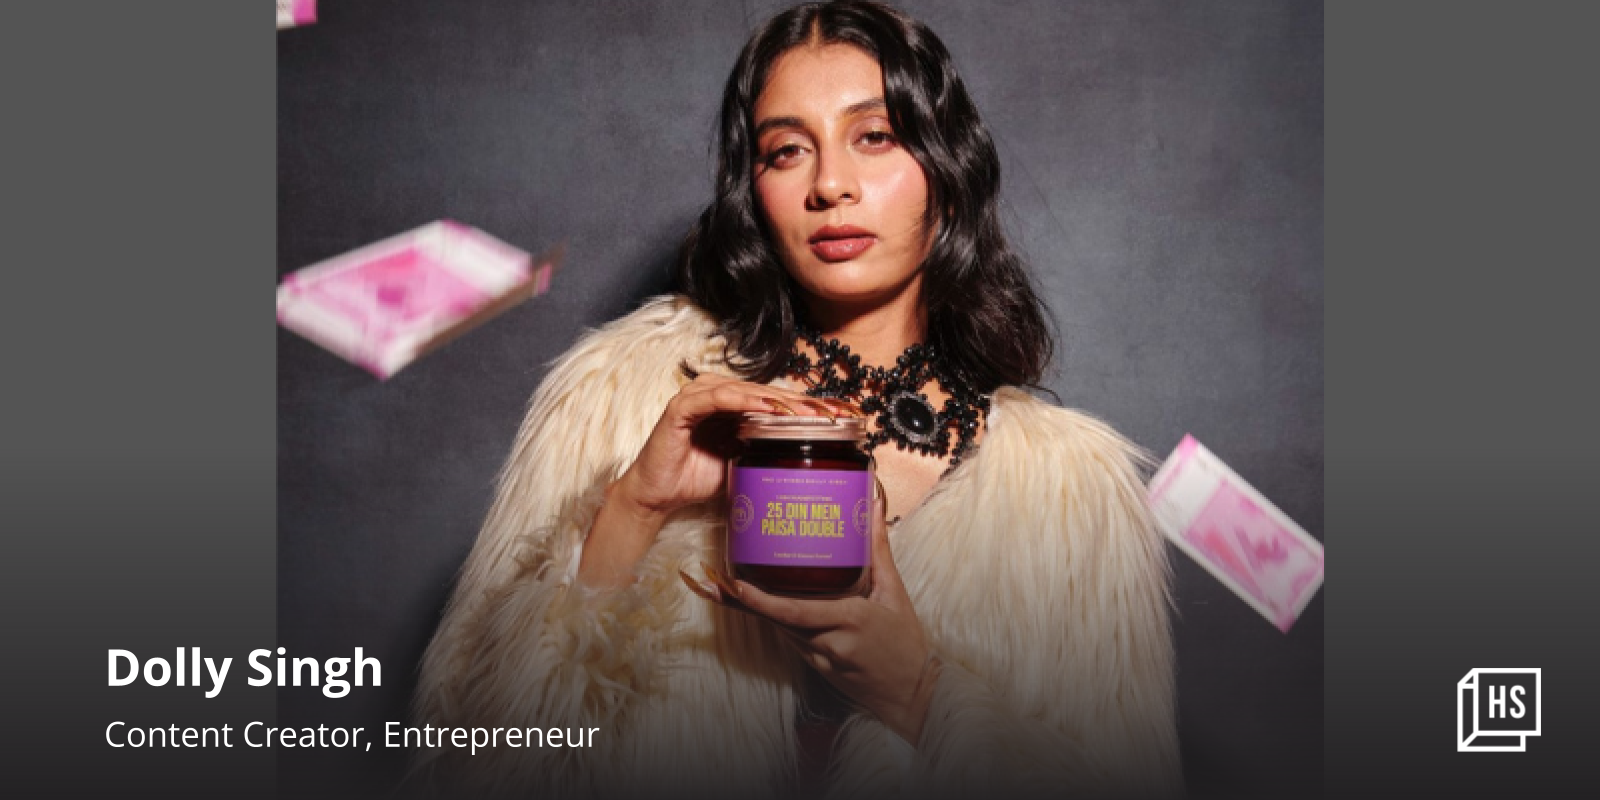 Content creator to entrepreneur: Dolly Singh launches candle line

